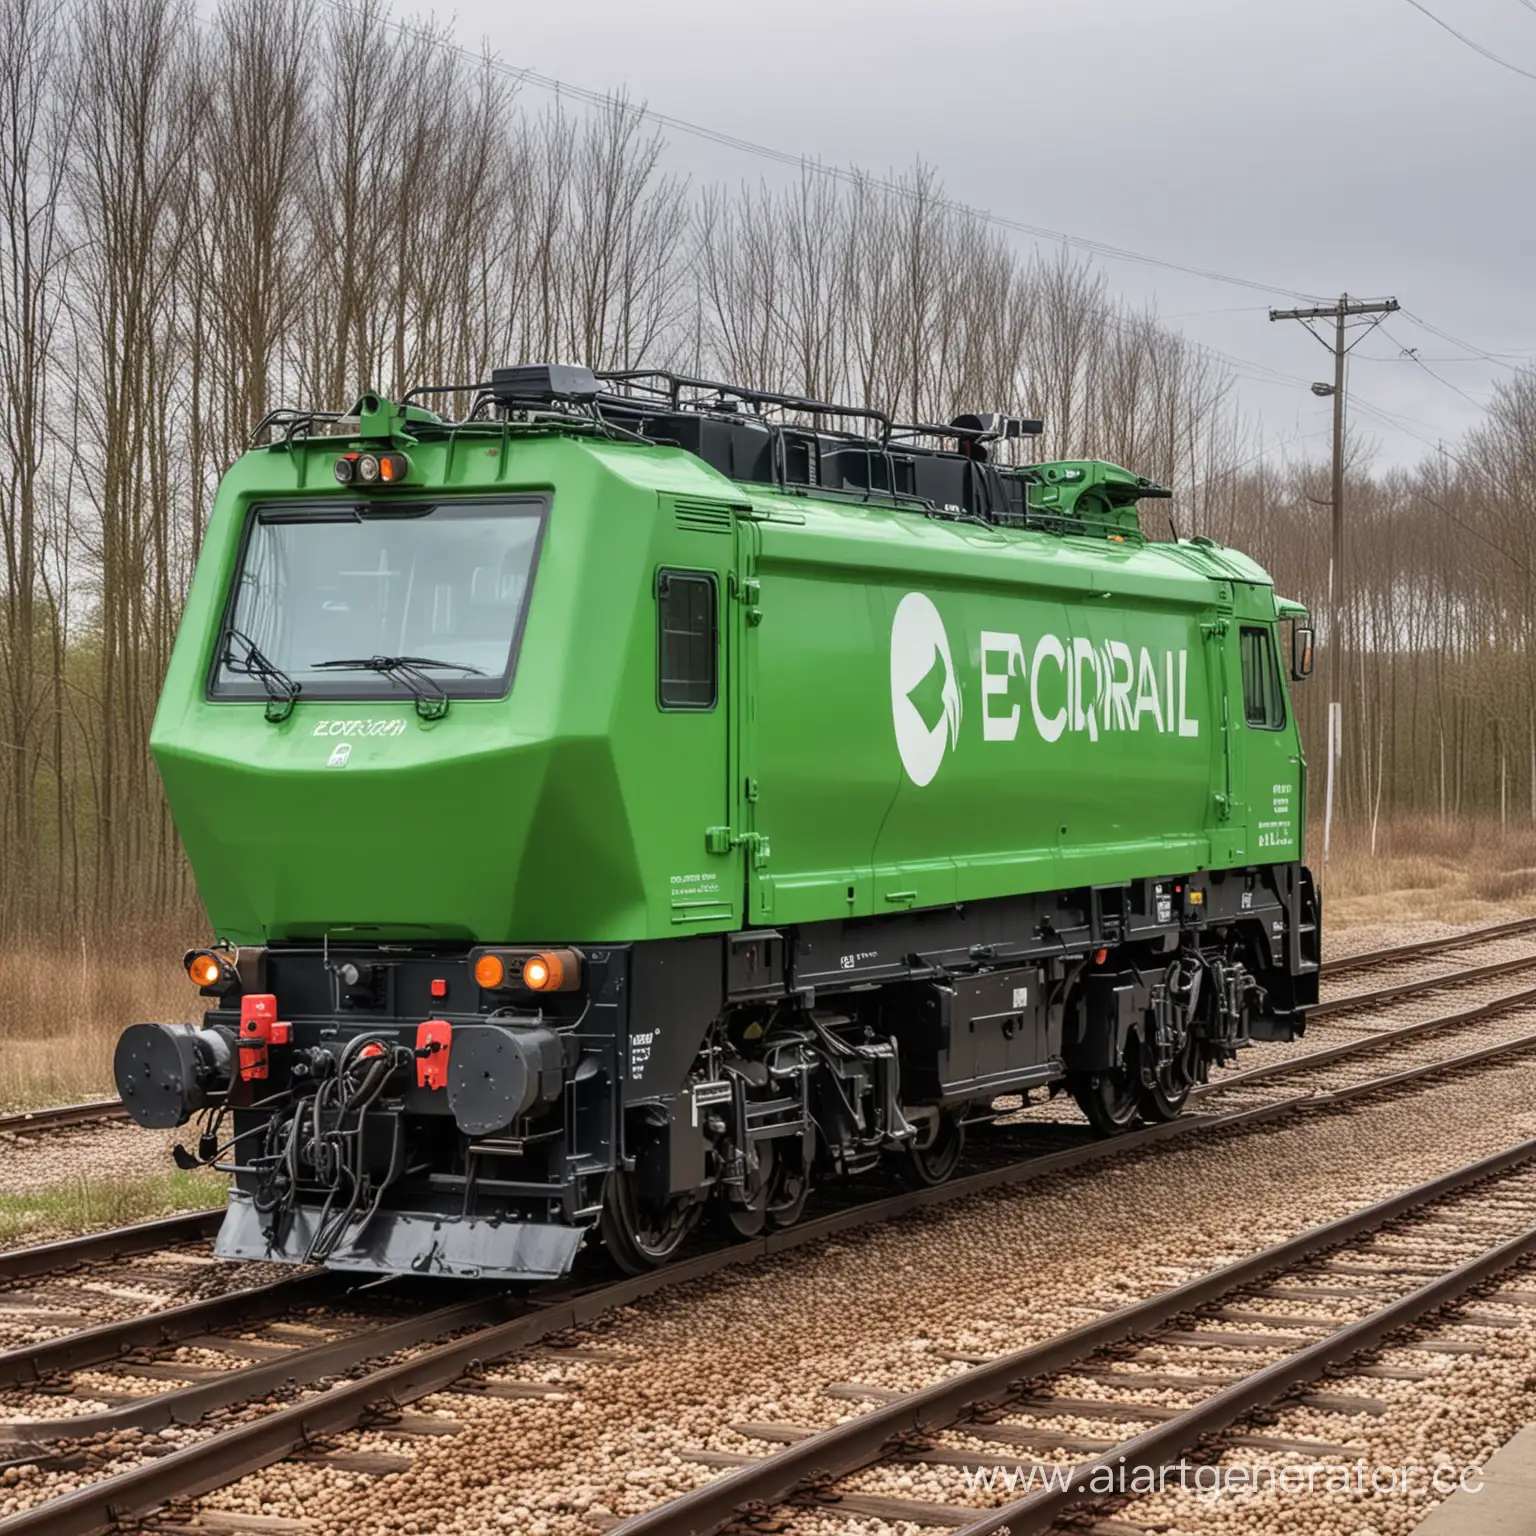 EcoRail-Cleaner-Super-Transport-Sustainable-HighSpeed-Train-in-Vibrant-Urban-Landscape